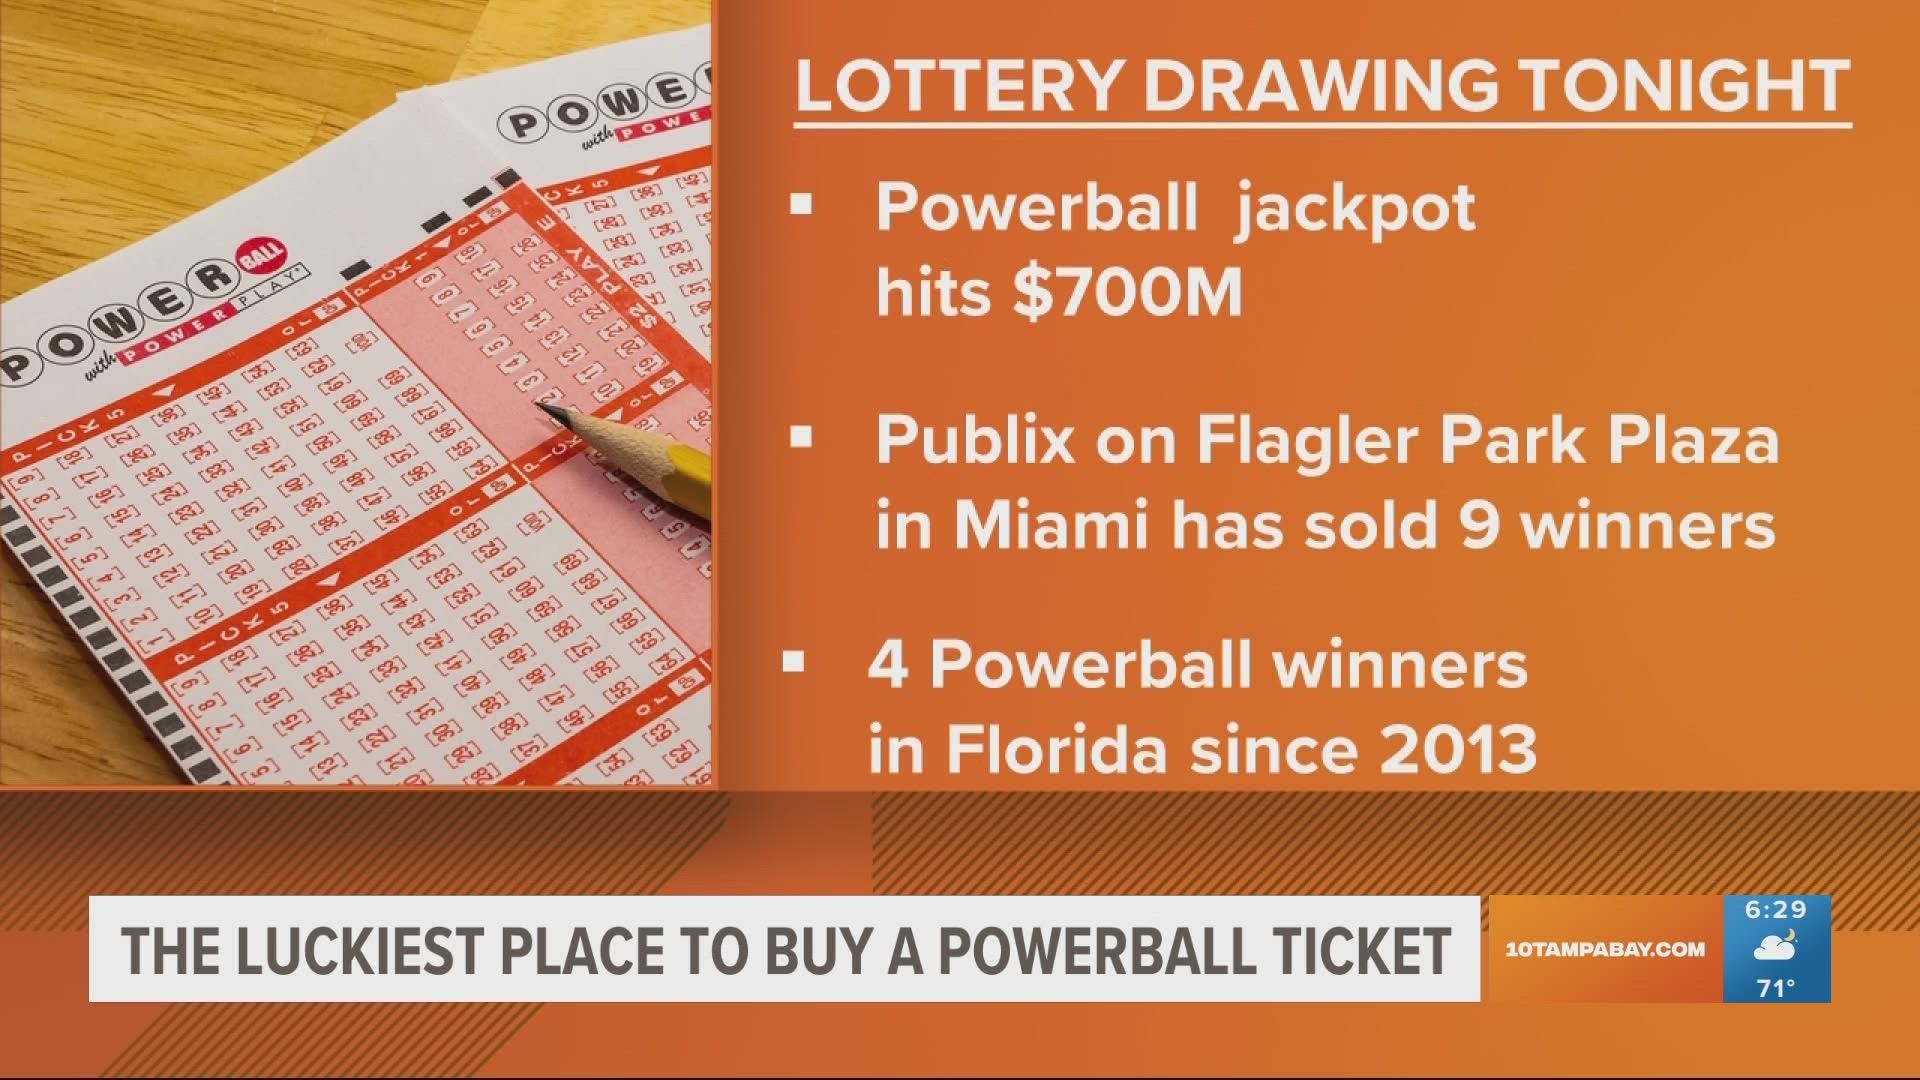 Four Powerball winners have been from Florida since 2013. And, one Publix in Miami has had nine Powerball winners.